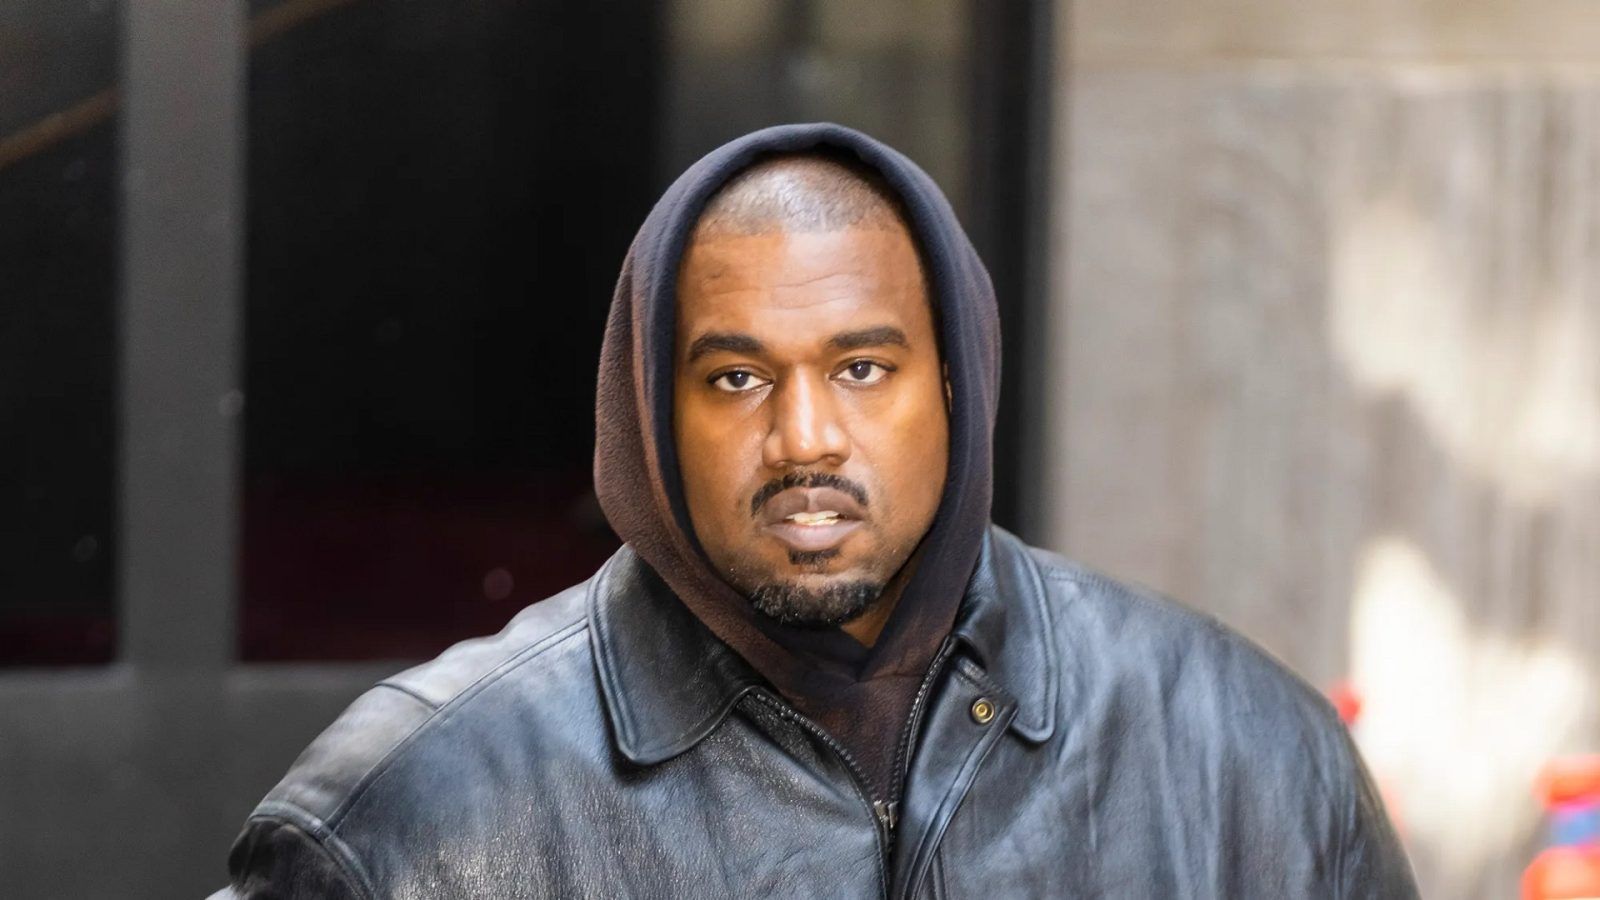 Adidas Cutting Ties With Kanye West Could Boost Sales at Nike: Analyst